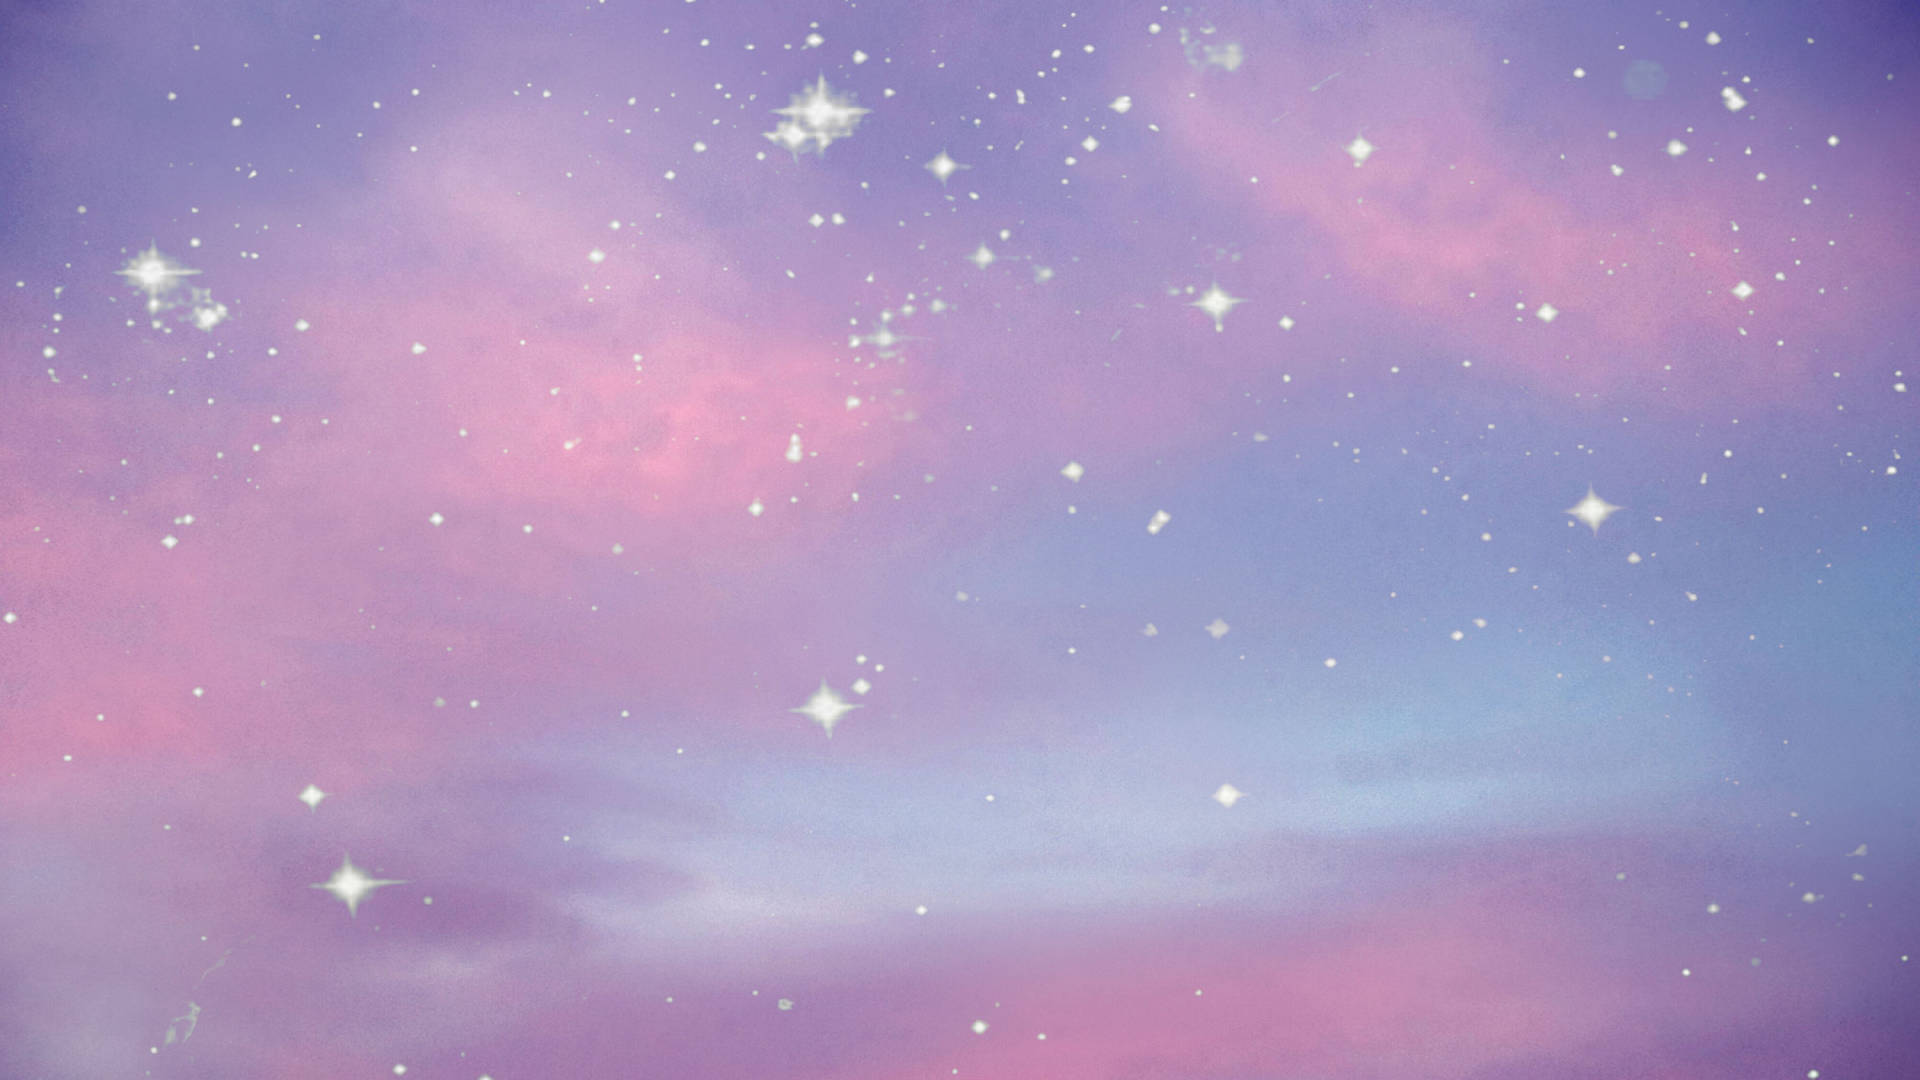 Starry Pastel Skies Pretty Aesthetic Background